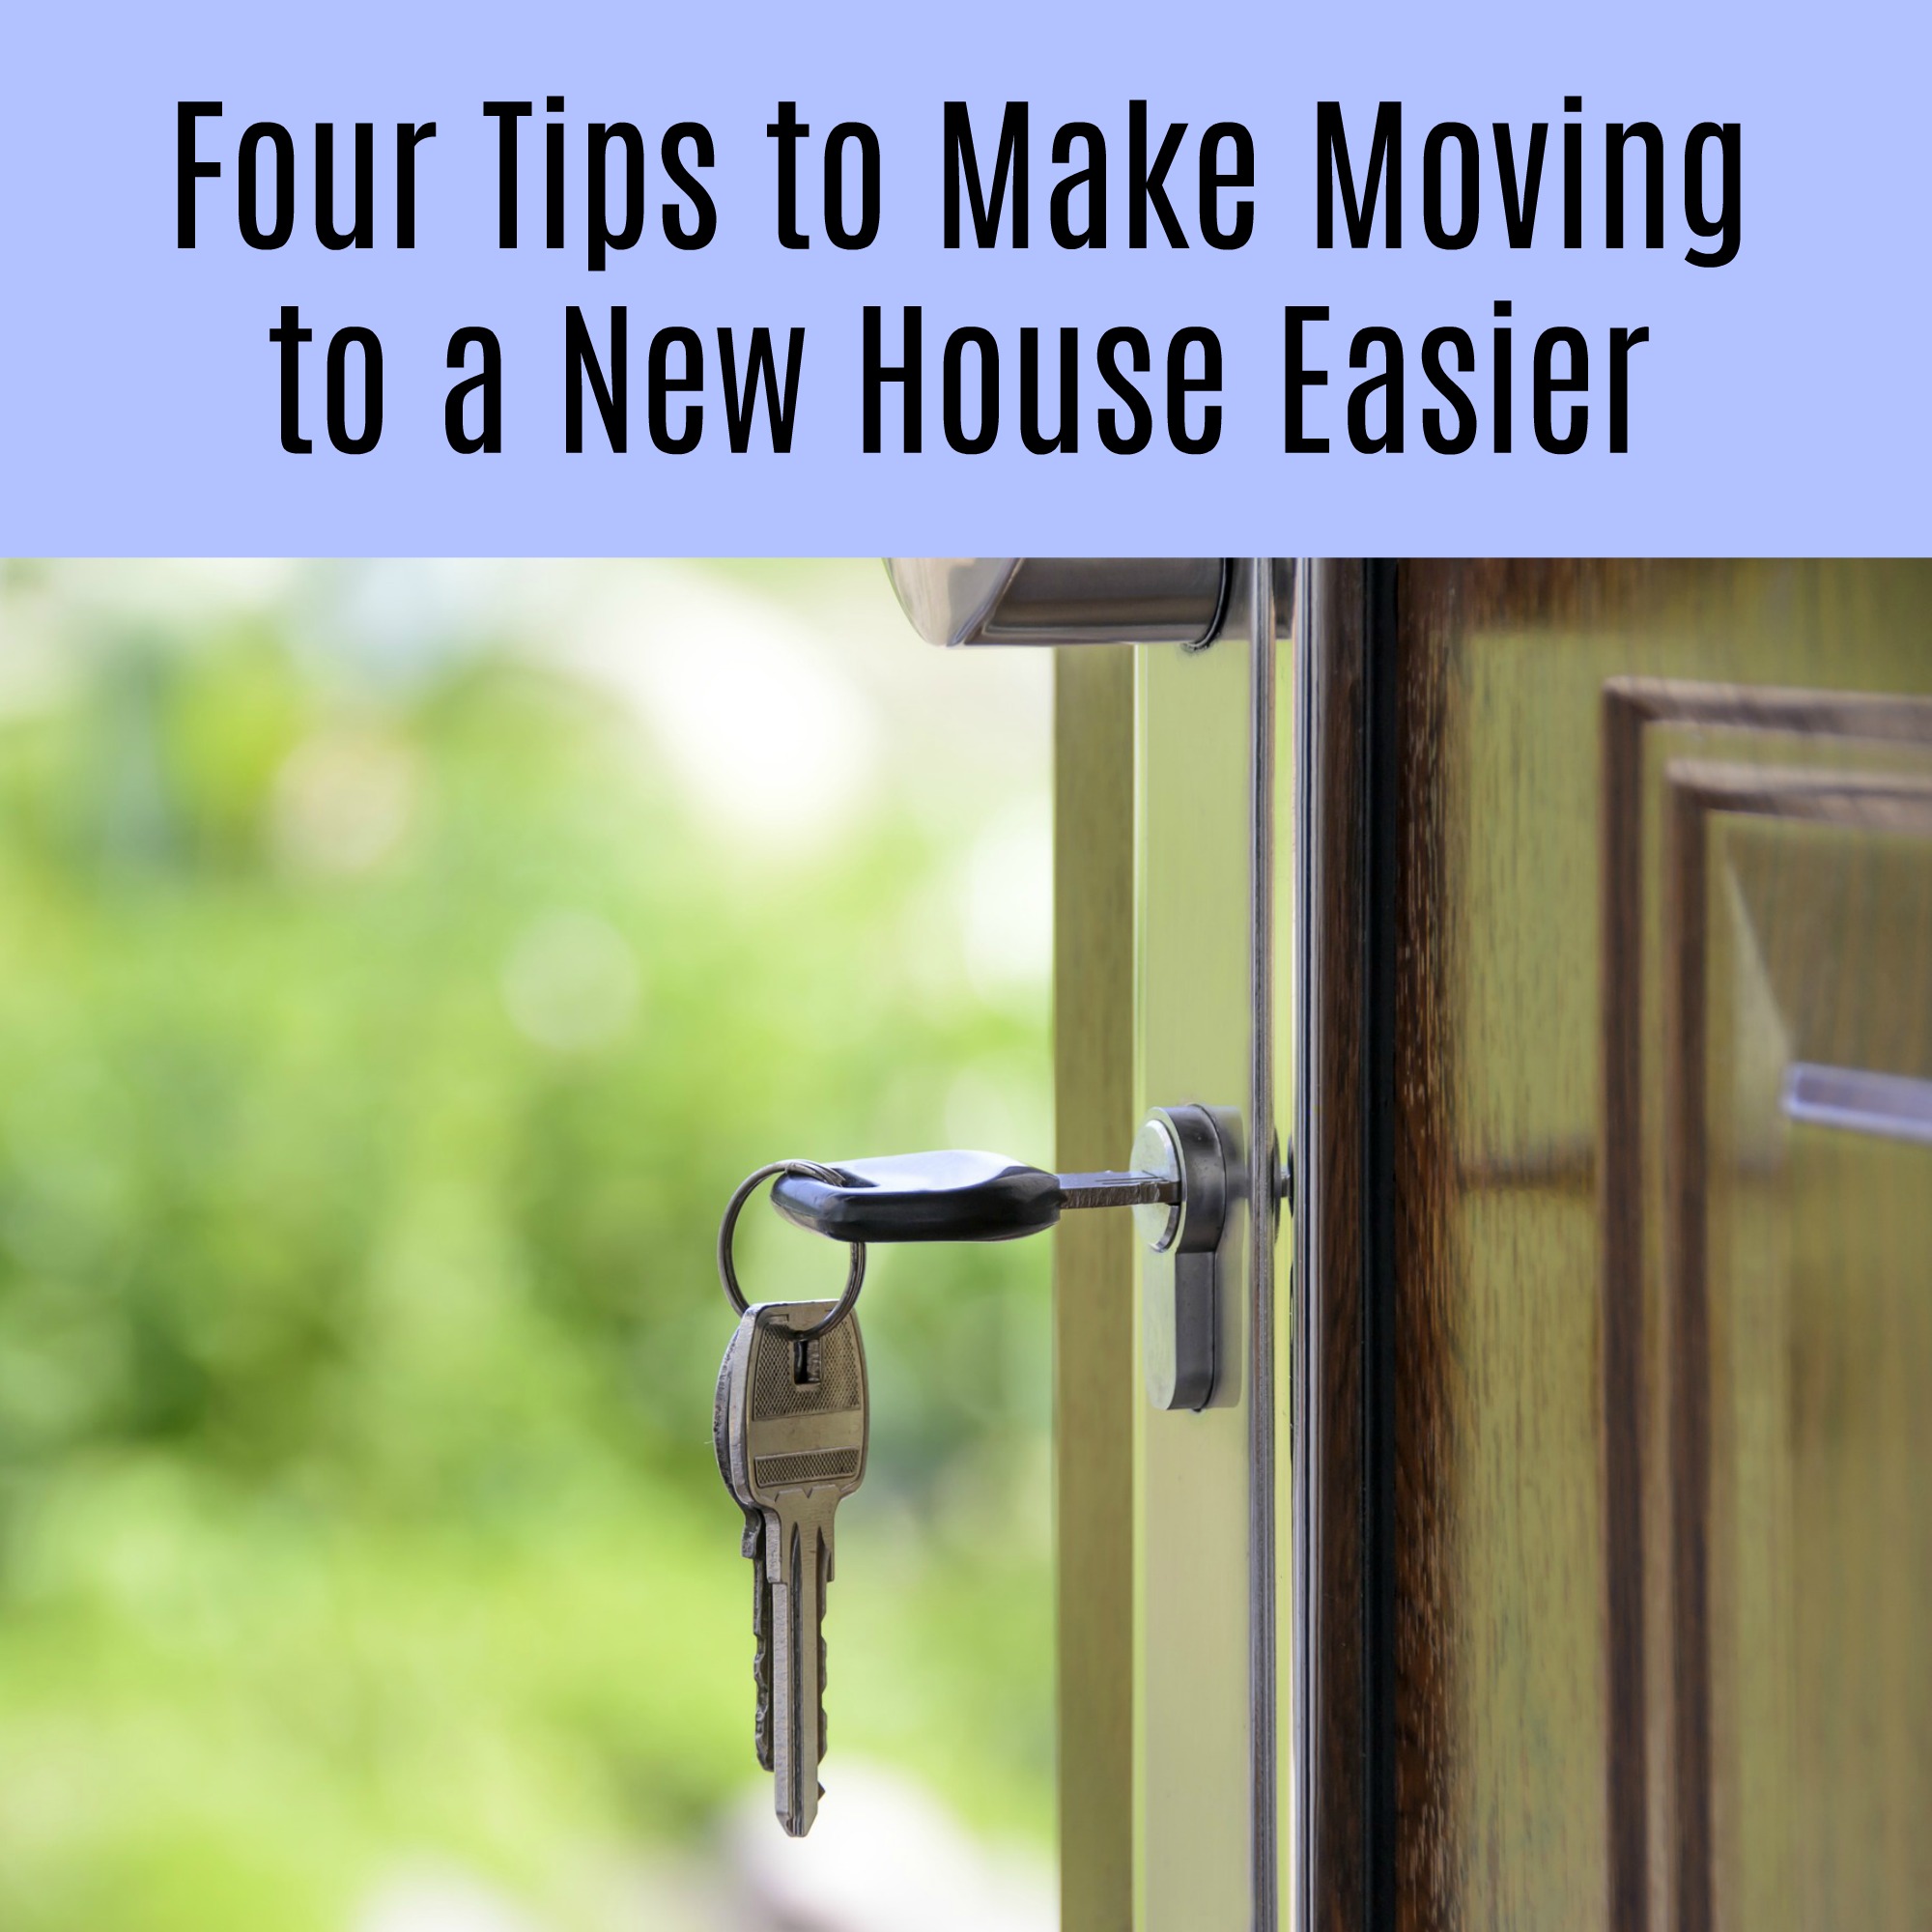 Four Tips to Use to Make Moving to a New House Easier